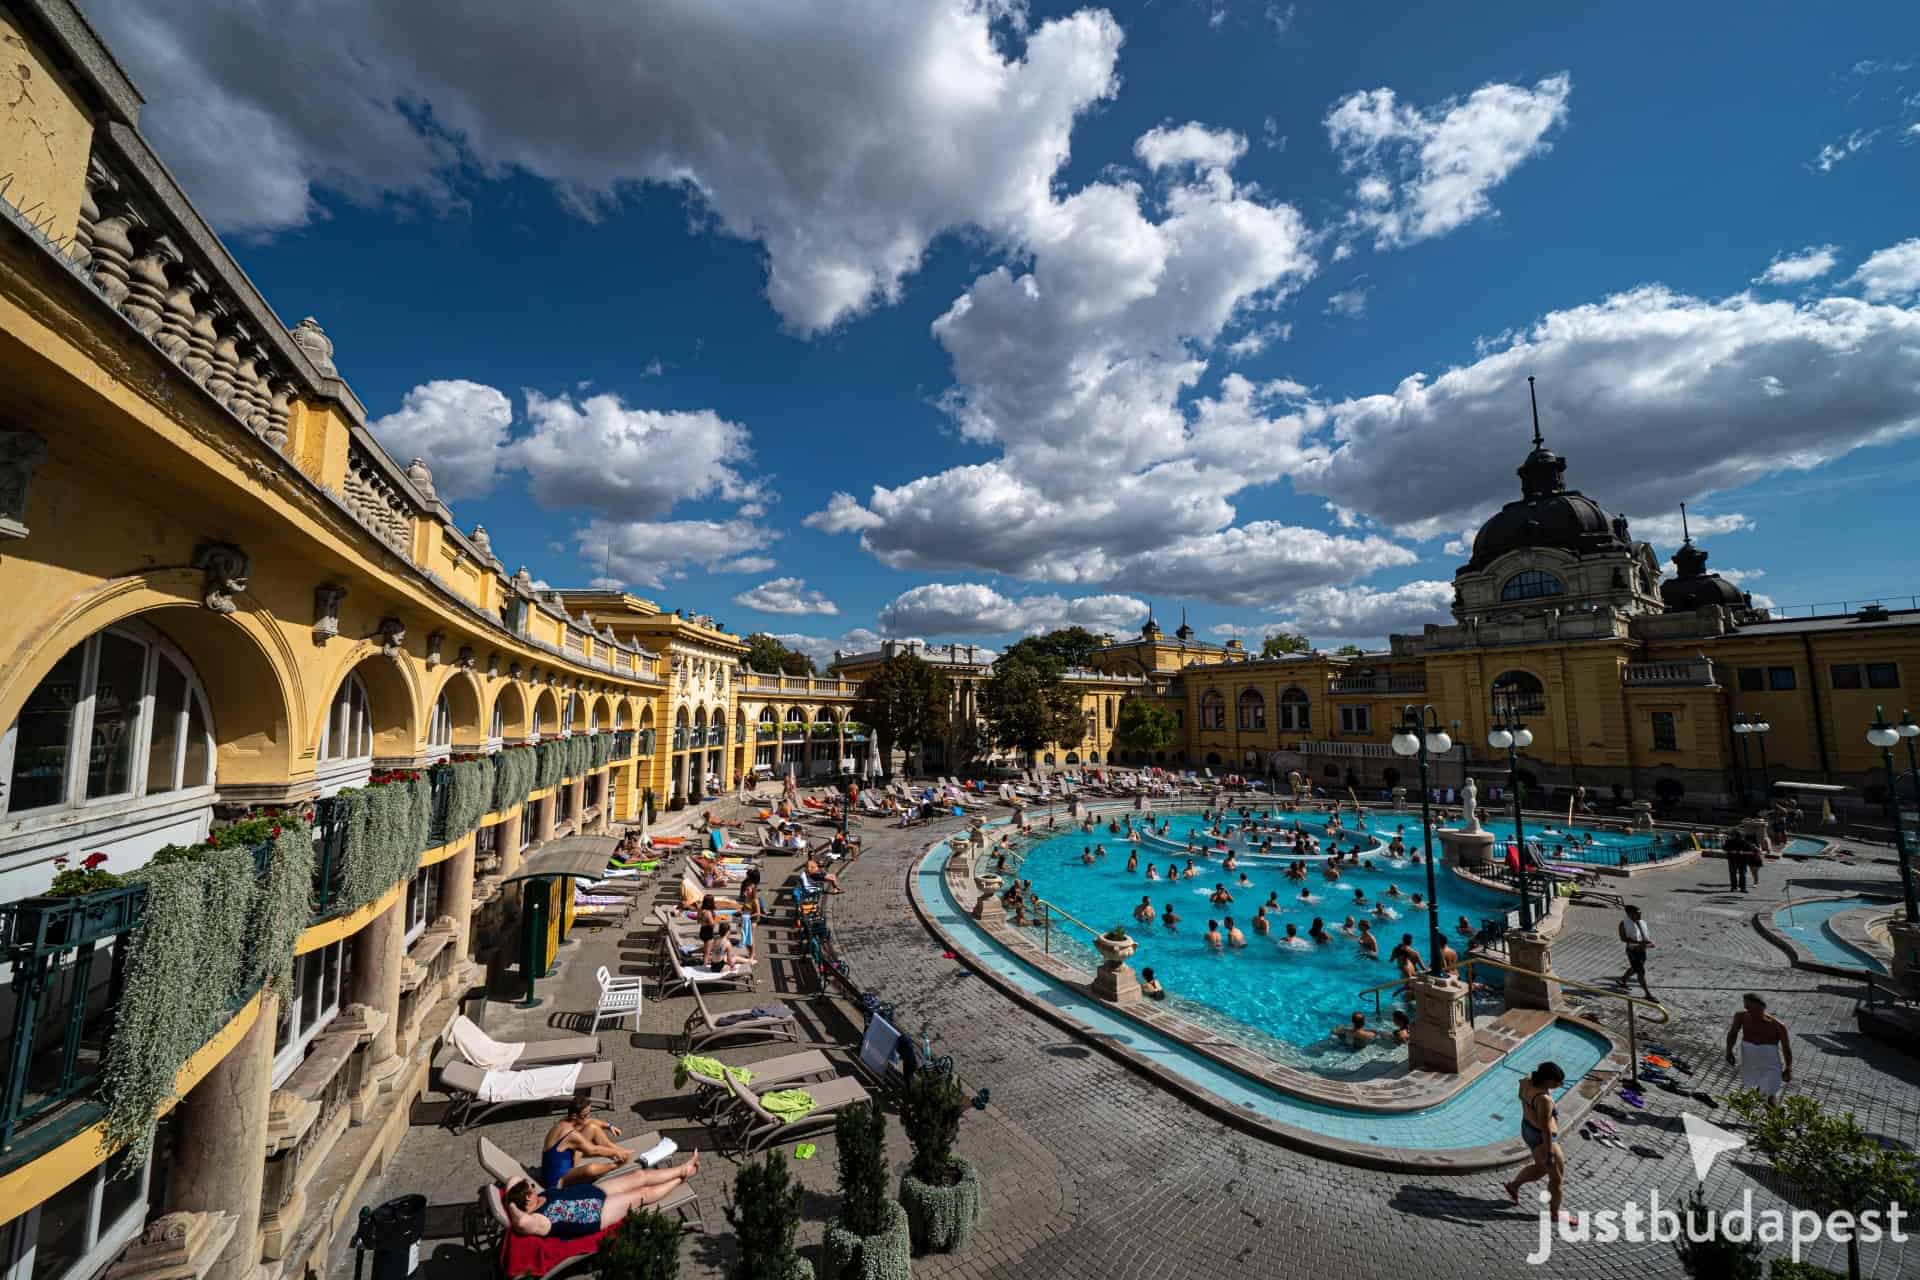 Budapest is the city of thermal baths